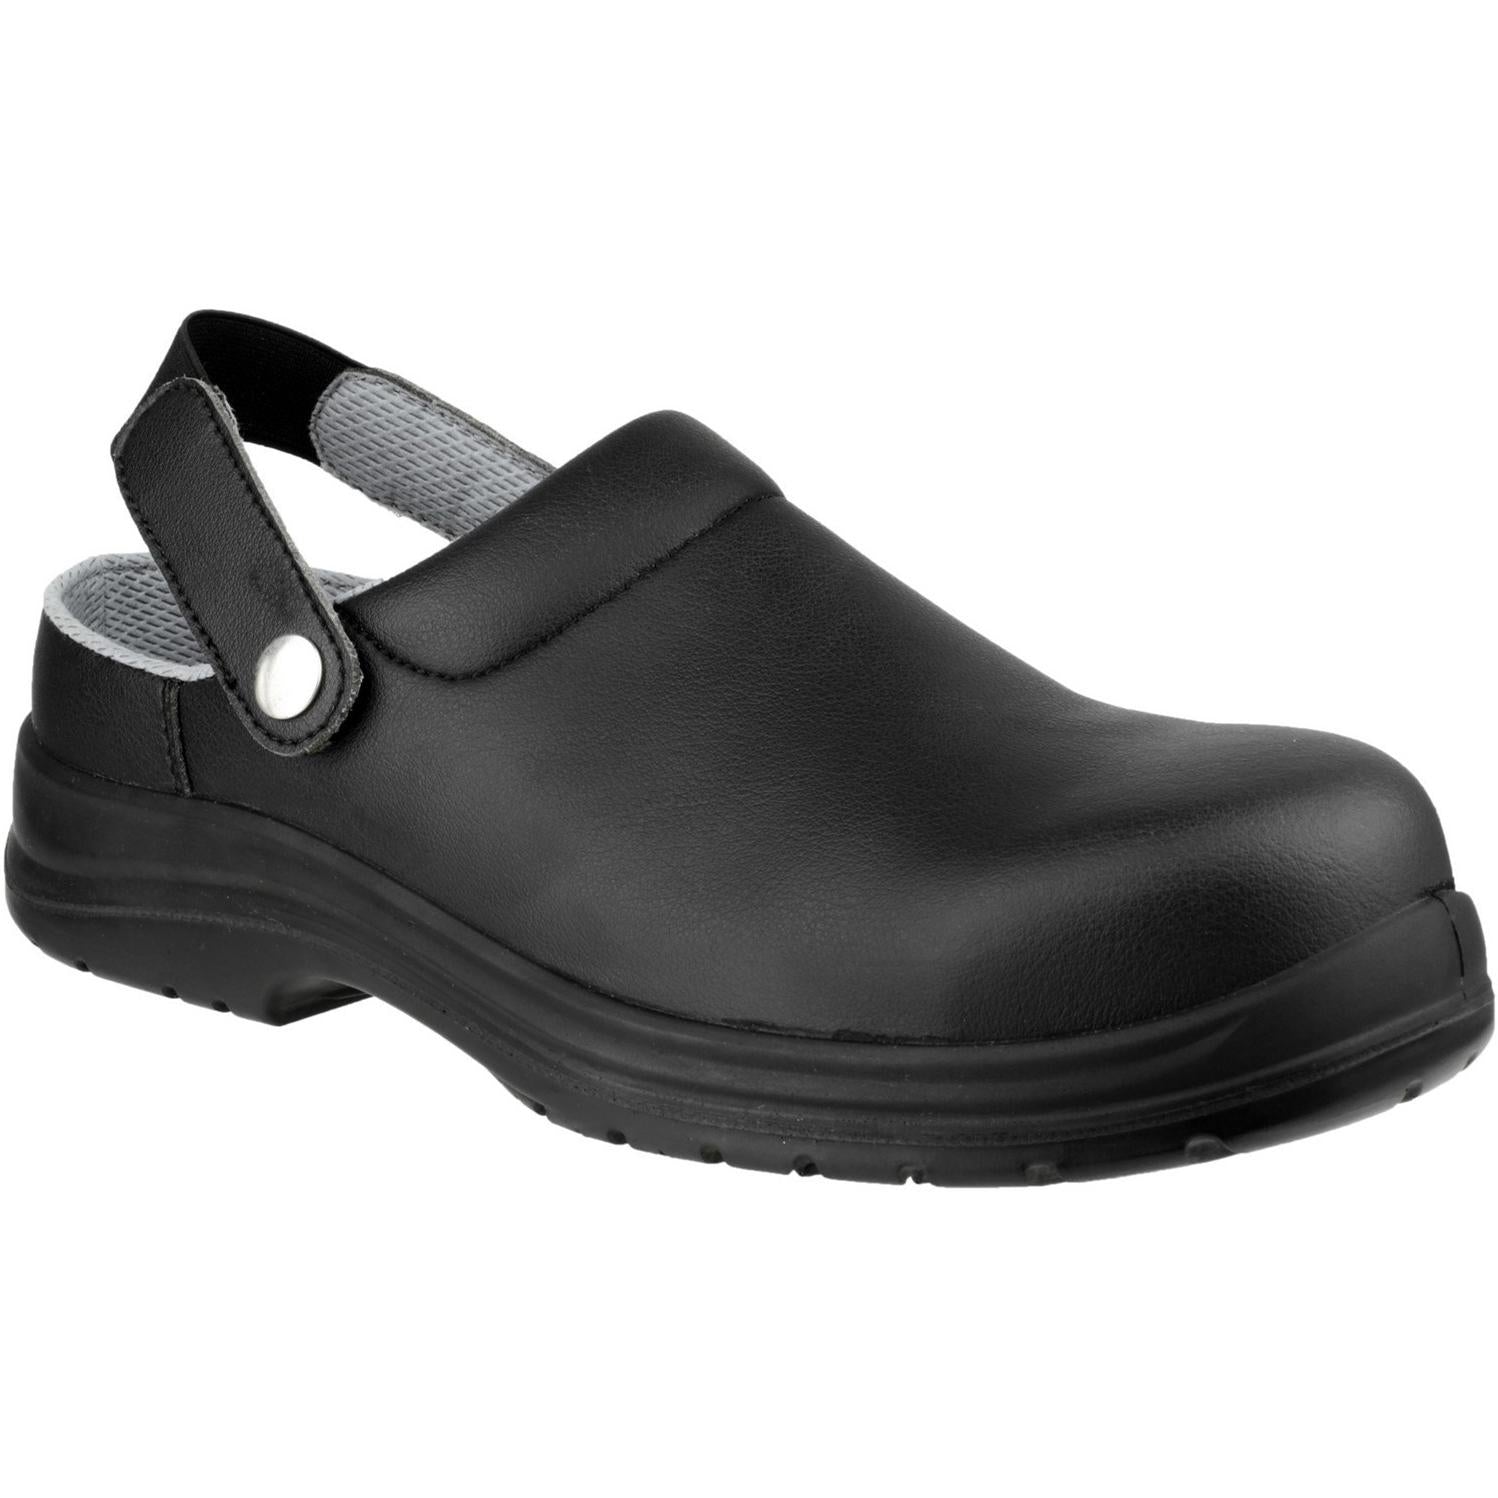 Amblers Safety FS514 Antistatic Slip on Safety Clog Boots